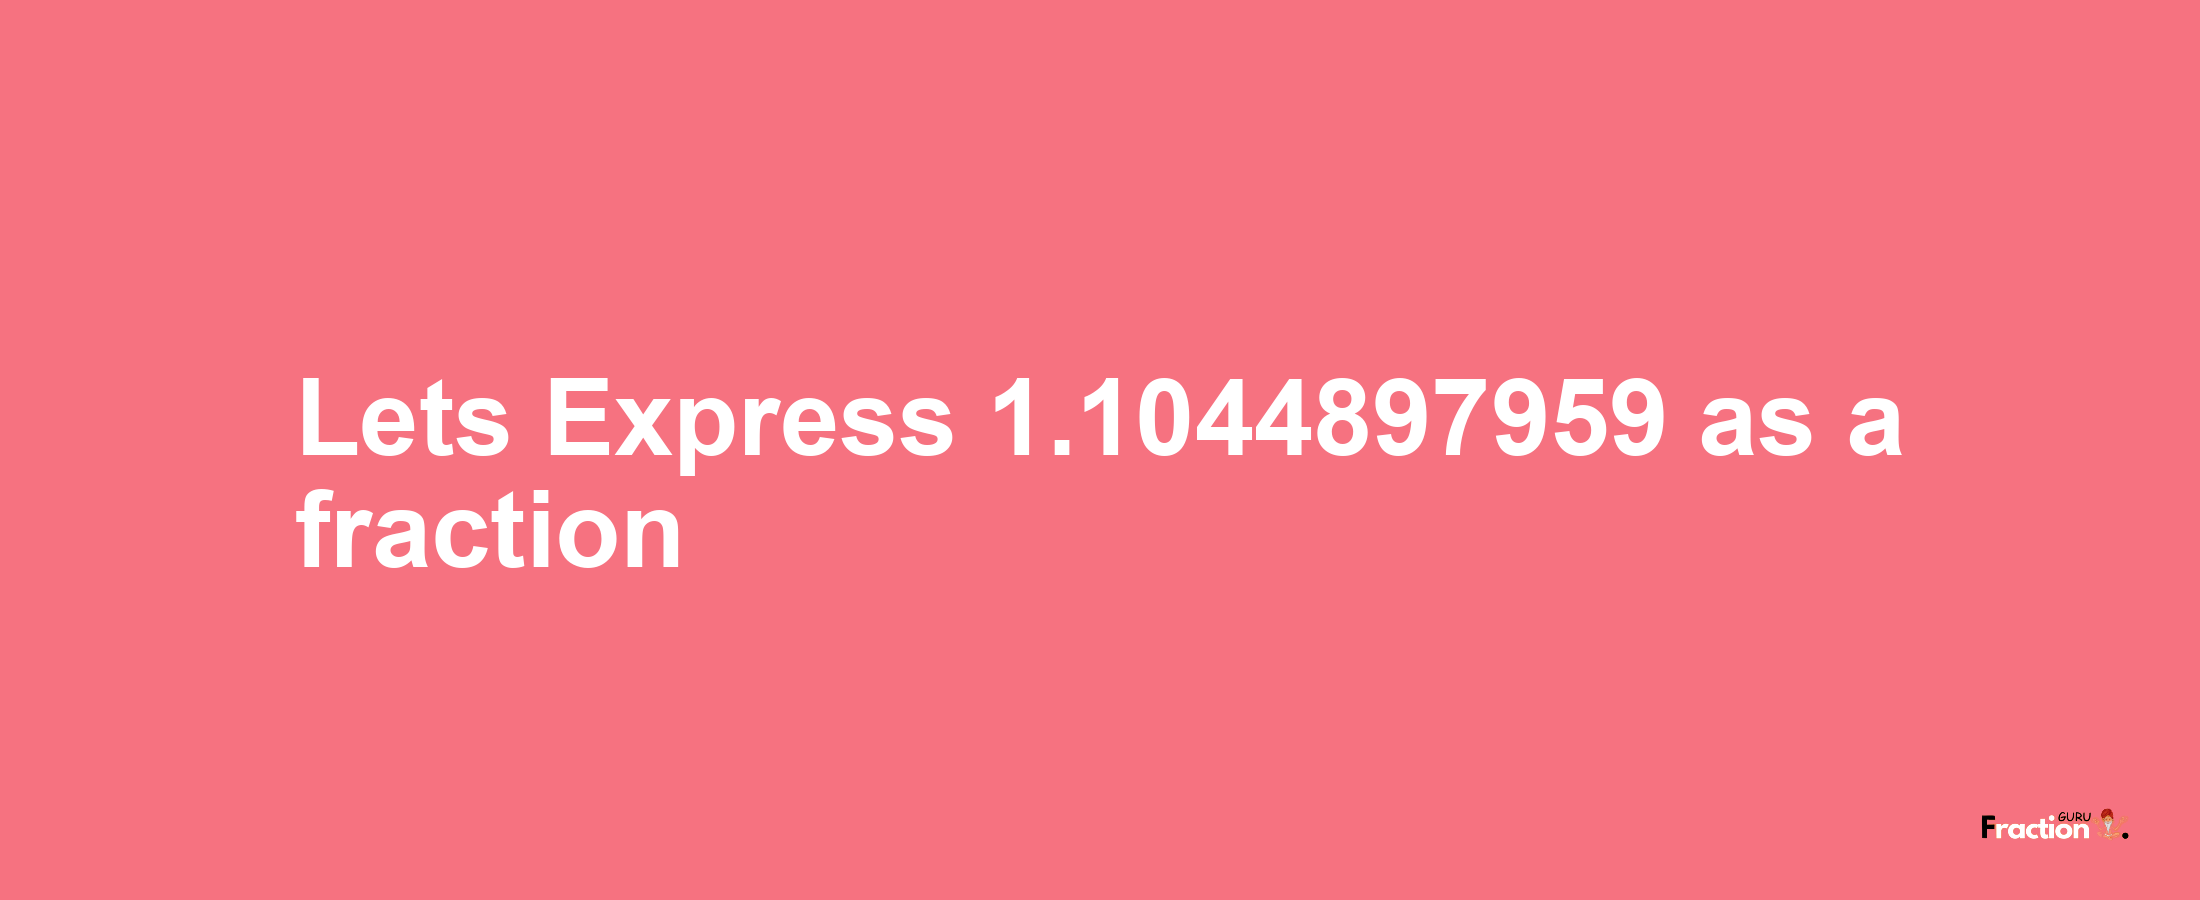 Lets Express 1.1044897959 as afraction